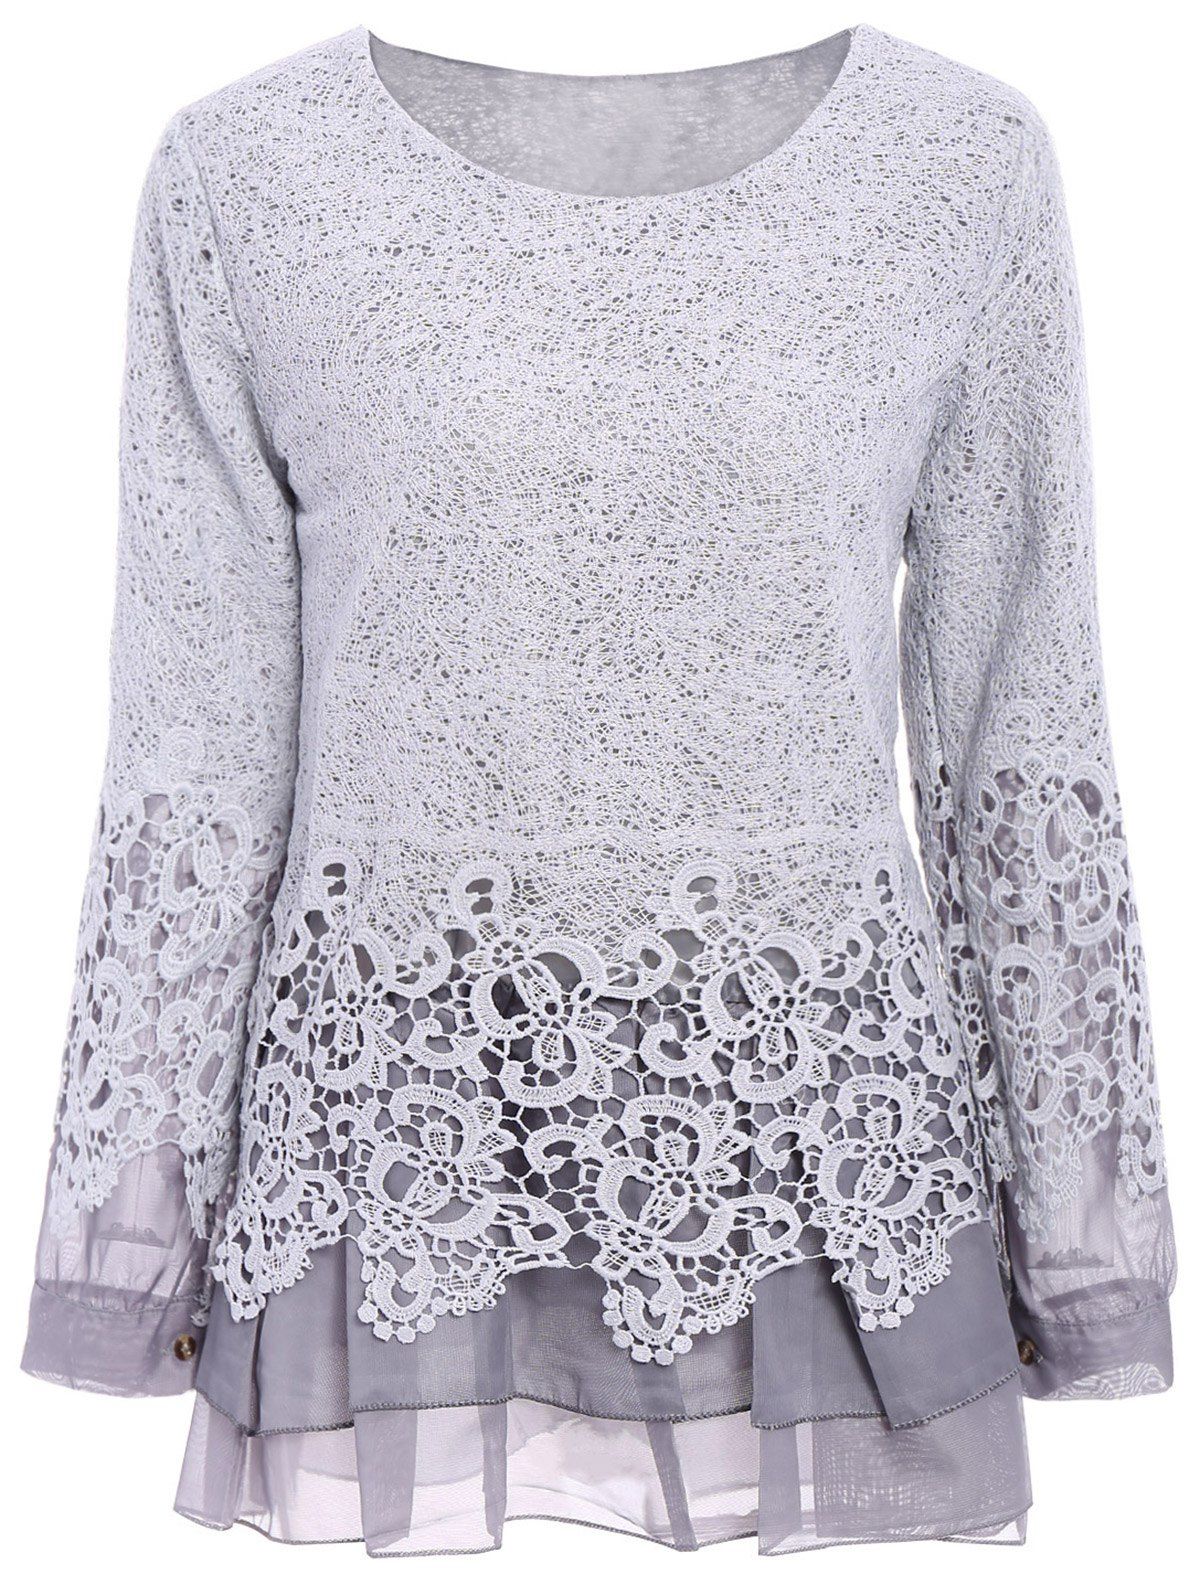 [70% OFF] Chic Round Collar Long Sleeve Lace Spliced Women's Blouse ...